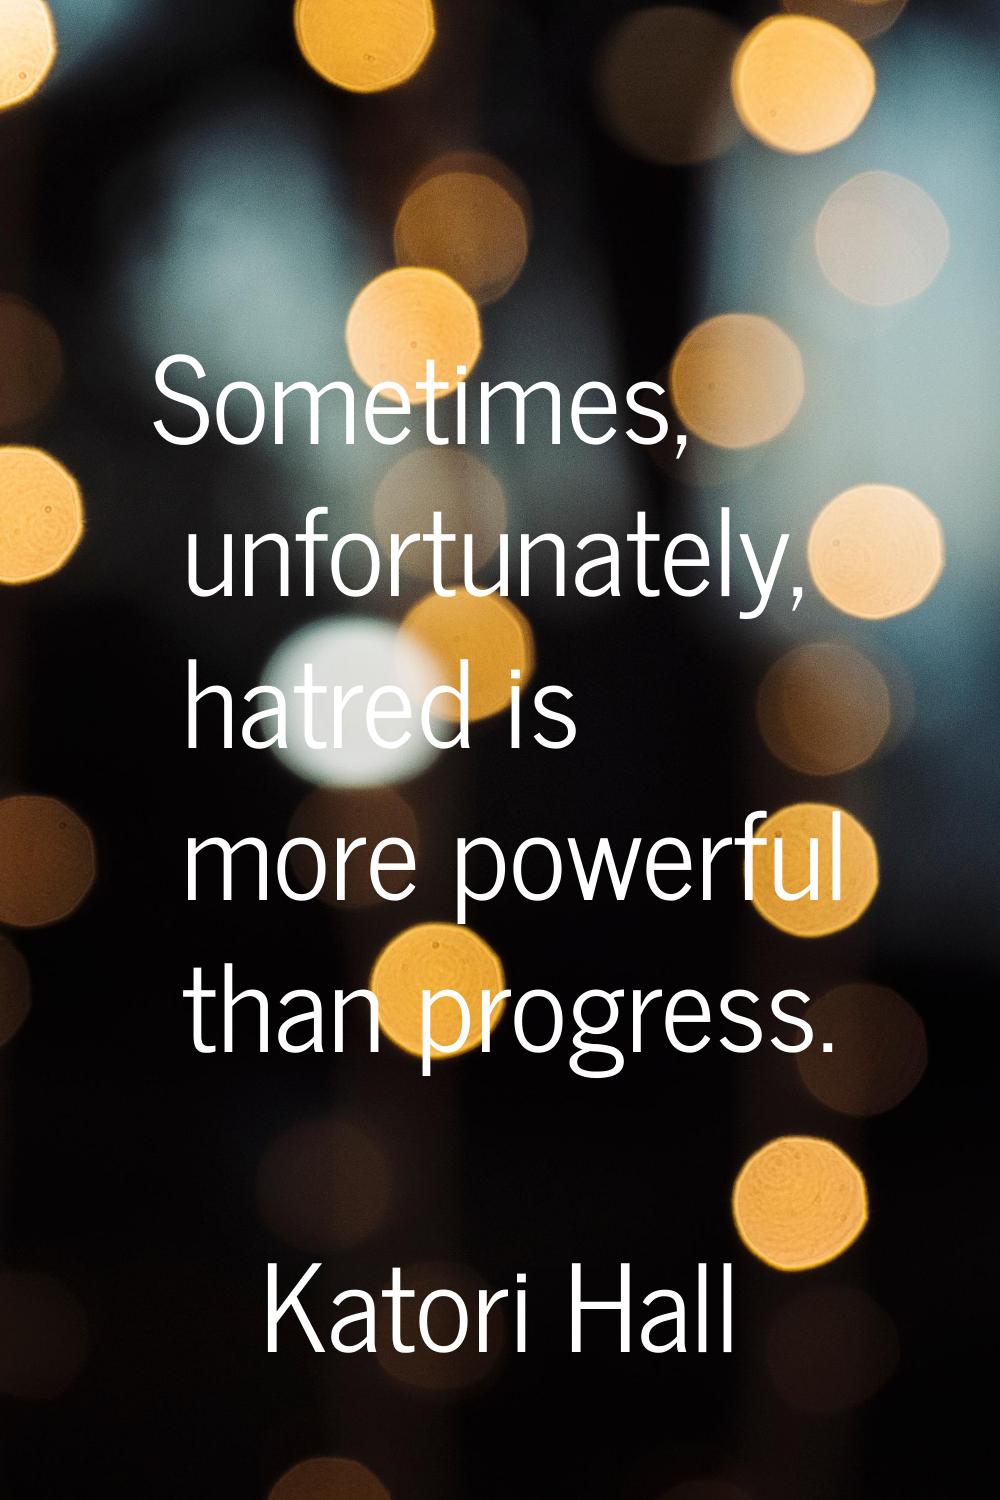 Sometimes, unfortunately, hatred is more powerful than progress.